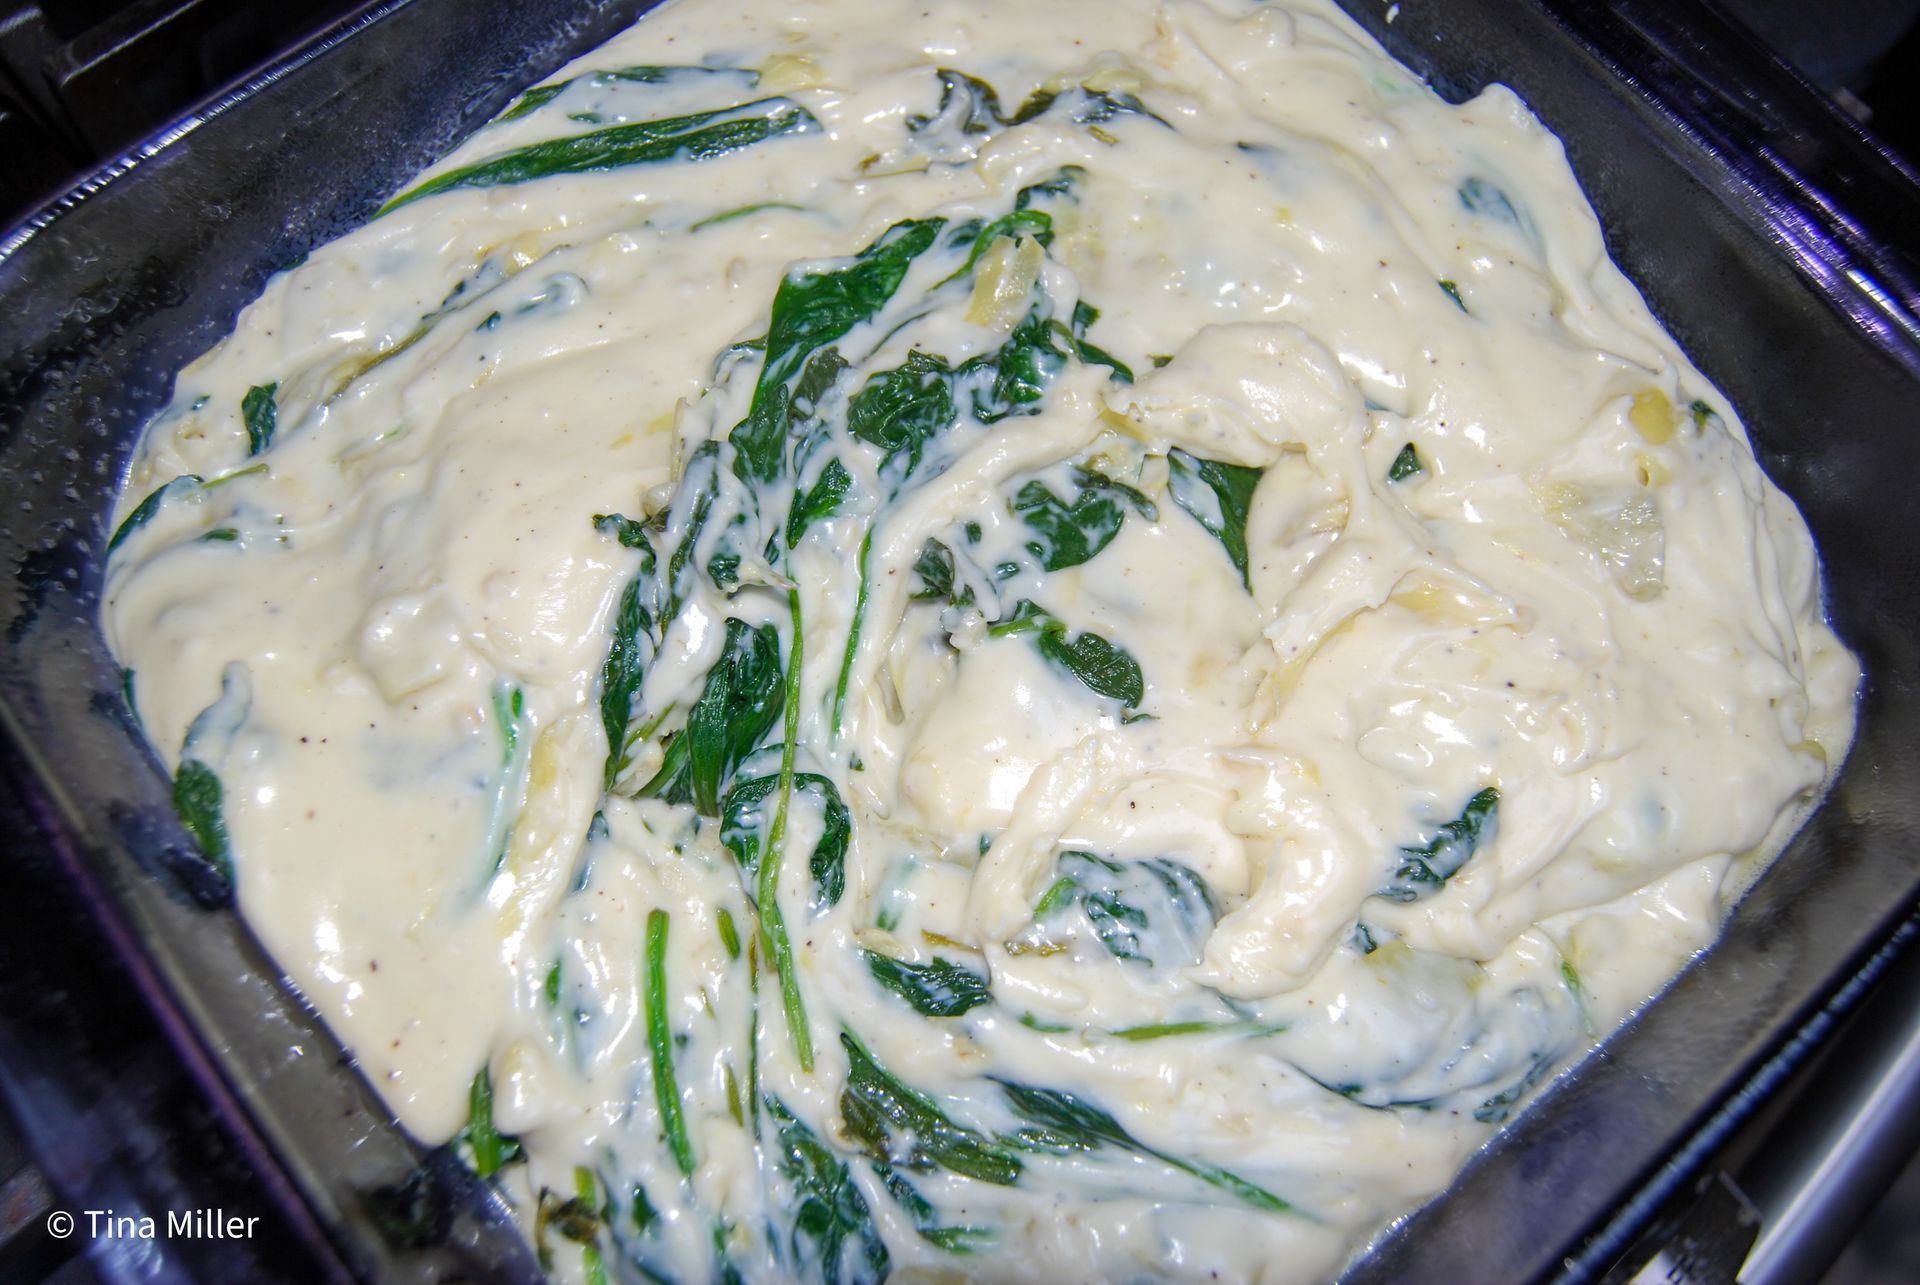 Spinach and artichoke dip poured into a 9x9 casserole dish before backing in the oven.